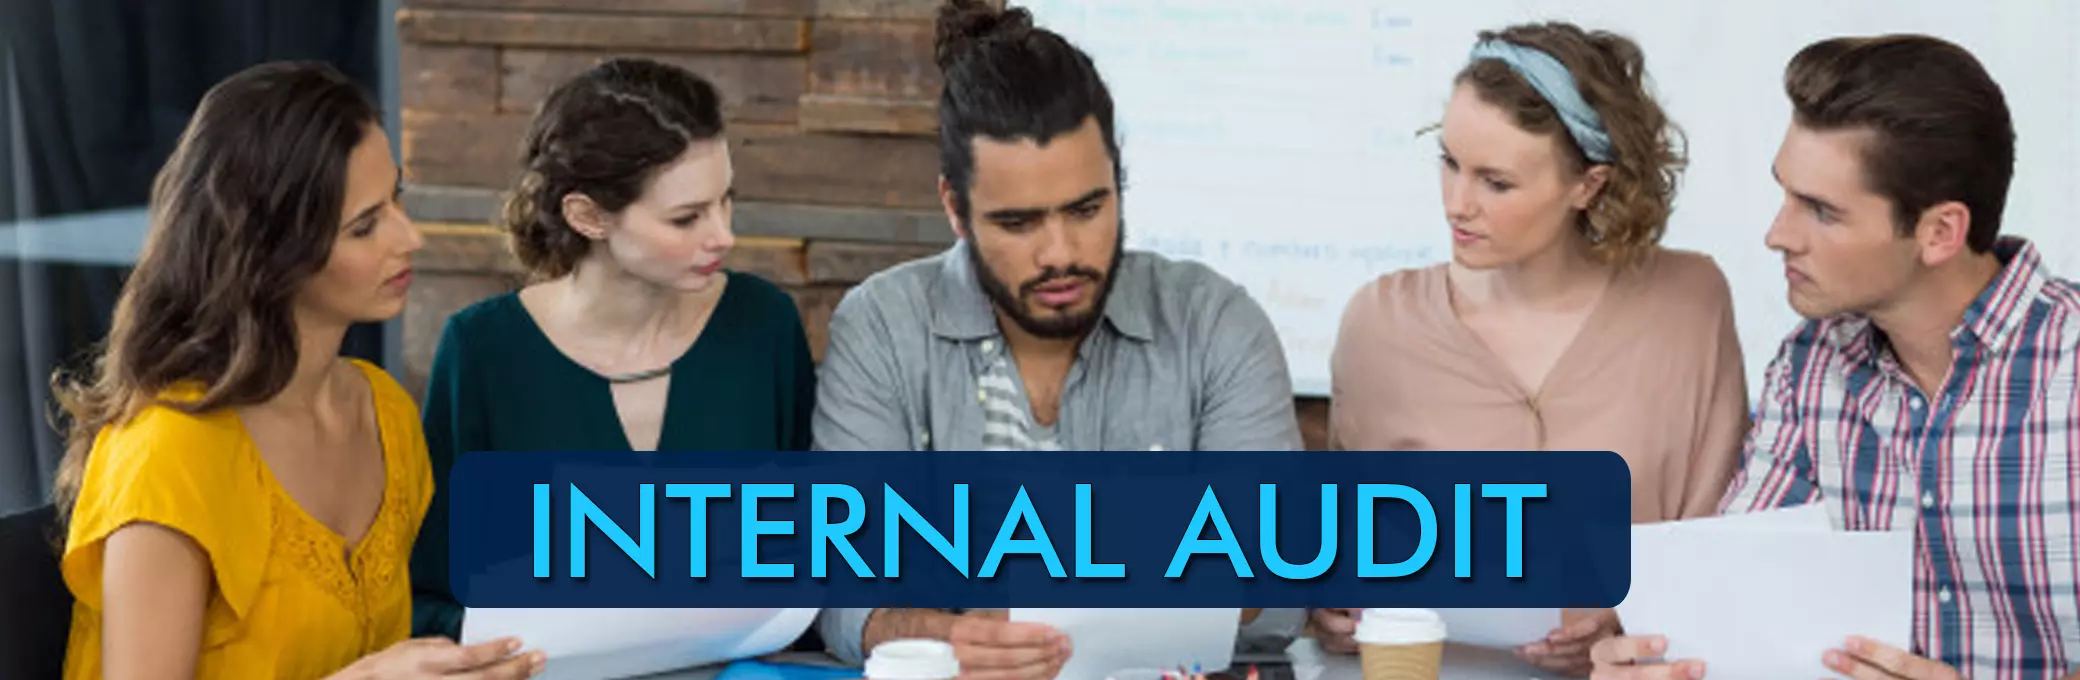 internal-Audit--page-banners